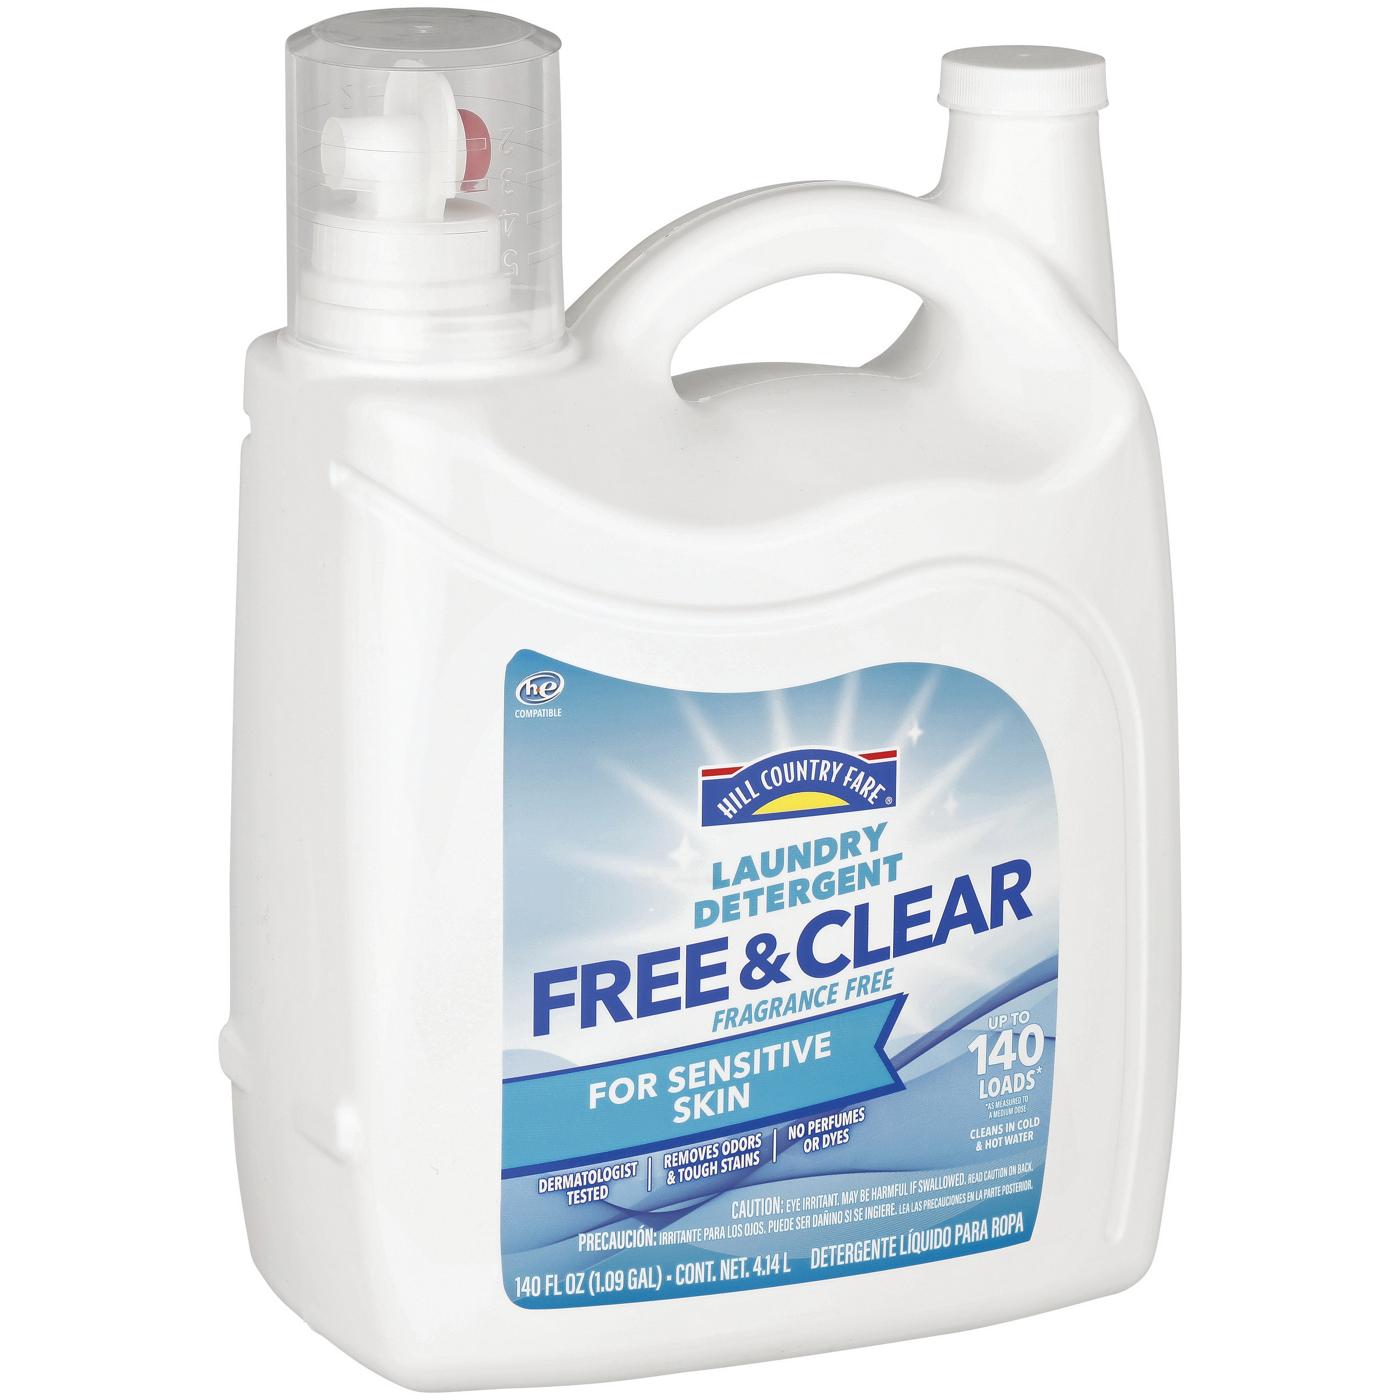 Hill Country Fare Free & Clear HE Liquid Laundry Detergent, 140 Loads - Fragrance-Free; image 3 of 3